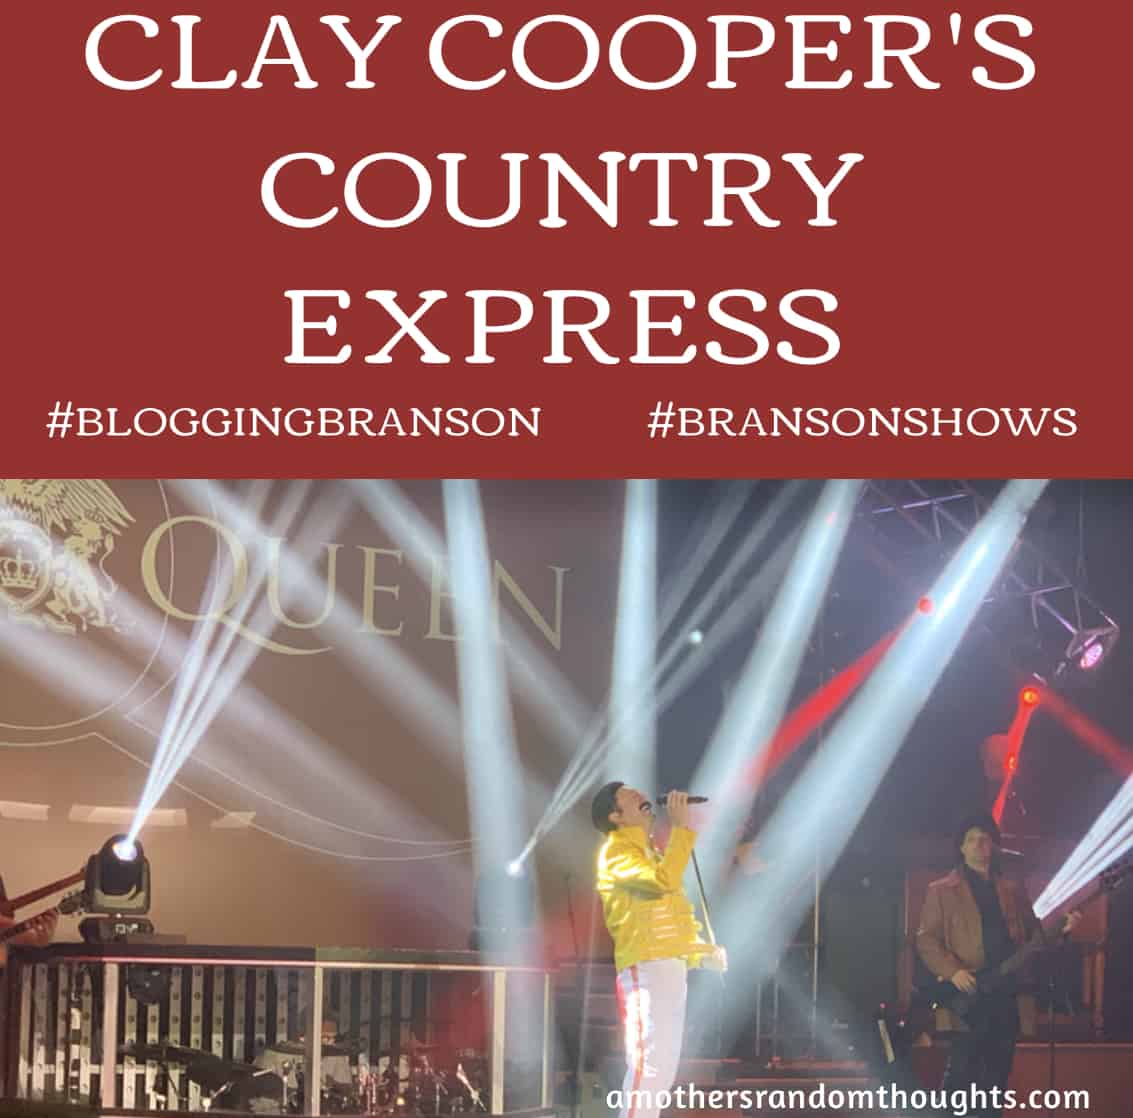 Blogging Branson - Clay Cooper's Country Express - Branson Shows